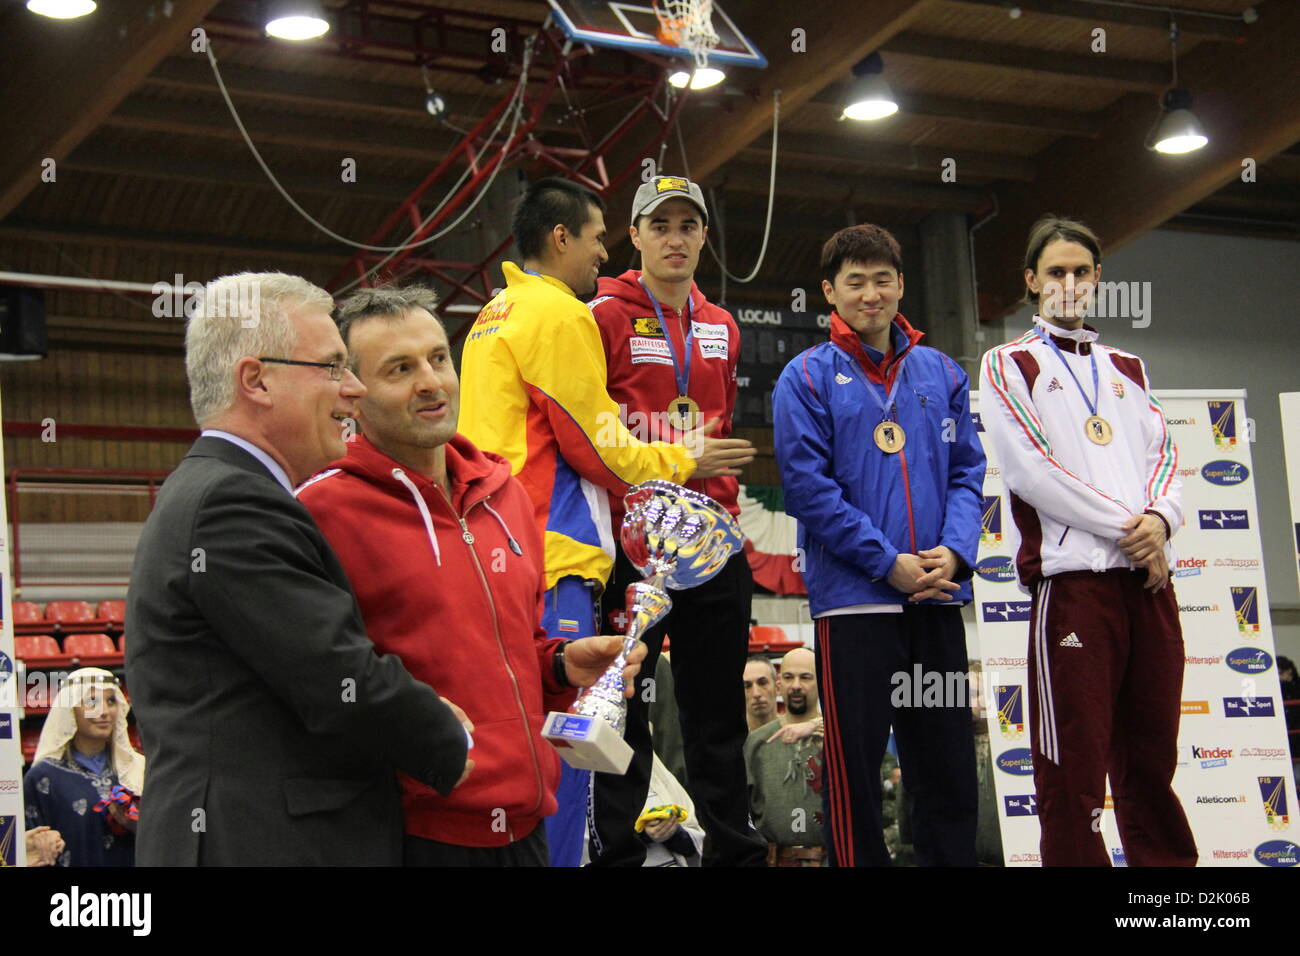 Saturday, January 26, 2013 Legnano, Milan, Italy: 1 Heinzer 2 Fernandez 3 Jung end Rédli - 36 Trophy Men's Epee World Cup, organized by Fencing Club Legnano in structure of the sport PalaBorsani. Stock Photo